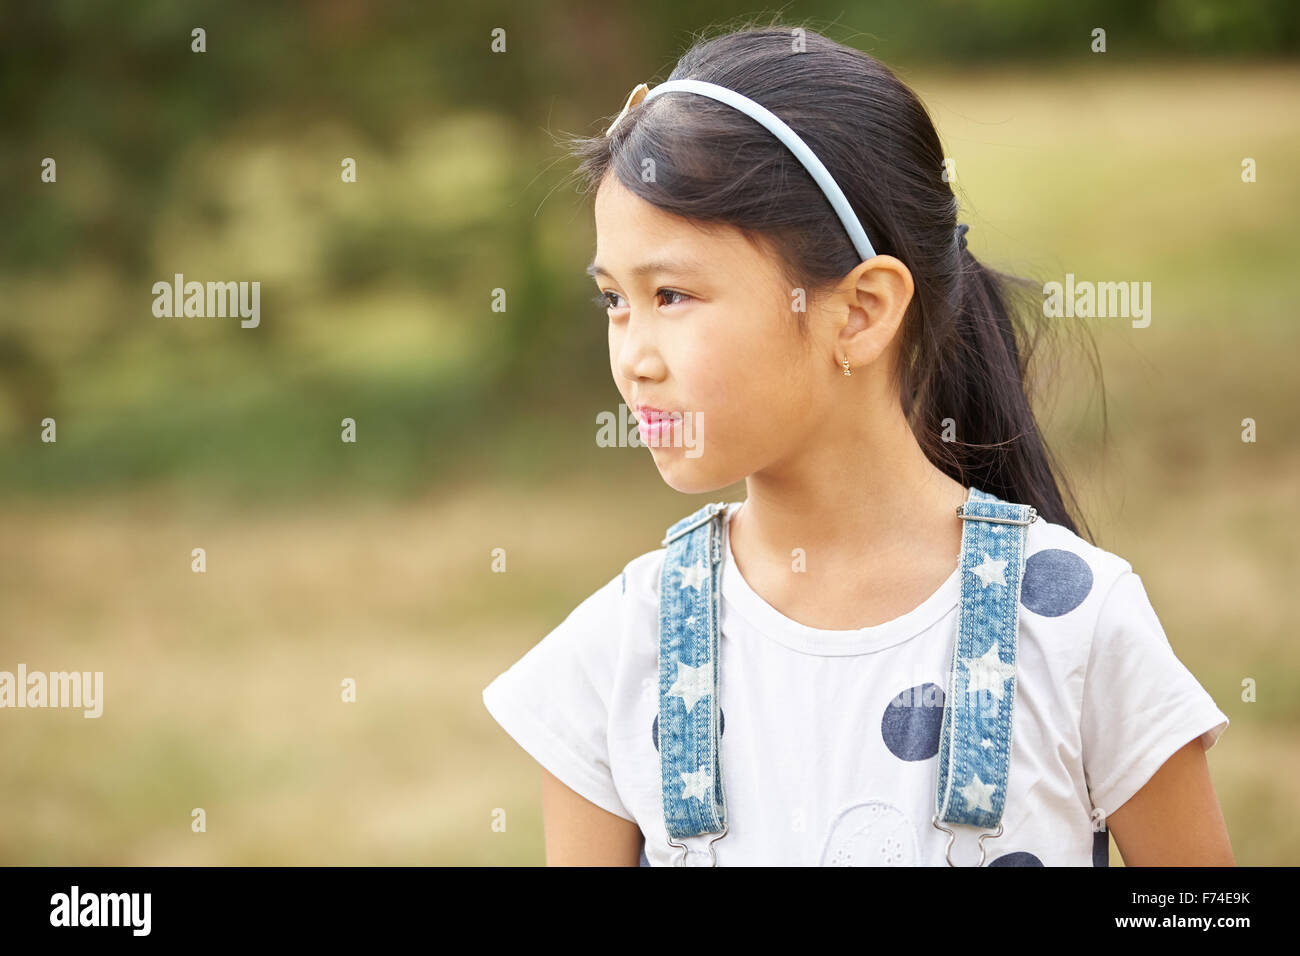 Asiatic girl with diadem and suspenders looks sceptical Stock Photo